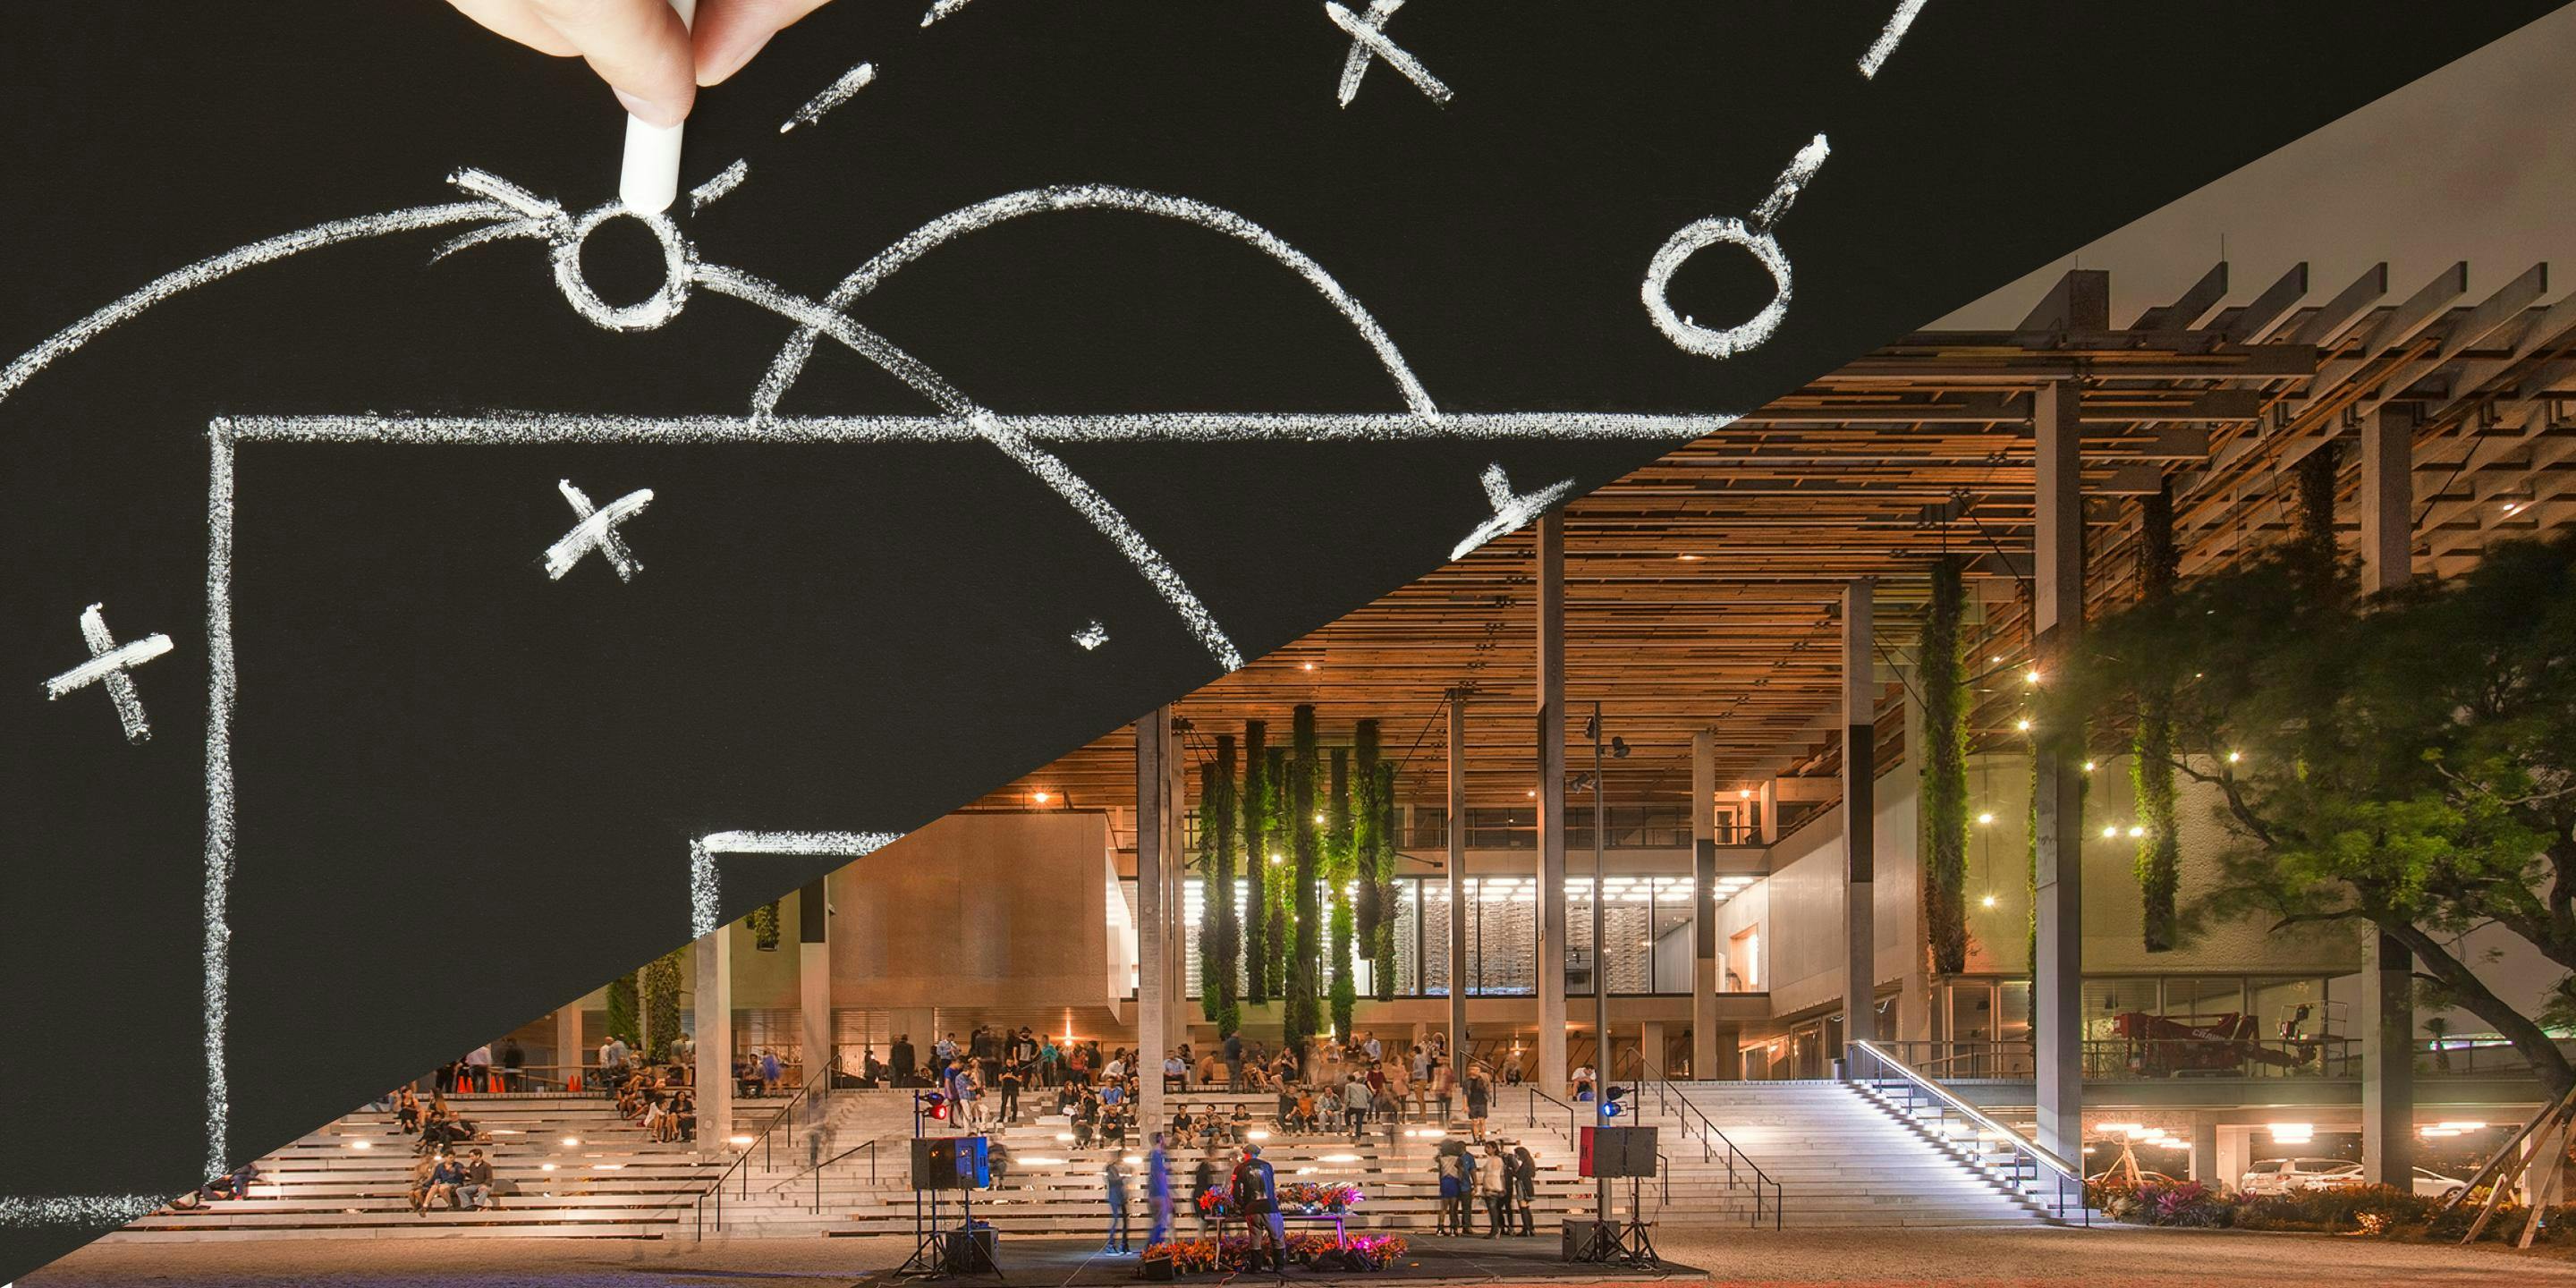 Designing for Museums: a tour of the PAMM and the Fútbol and Contemporary Art Exhibit